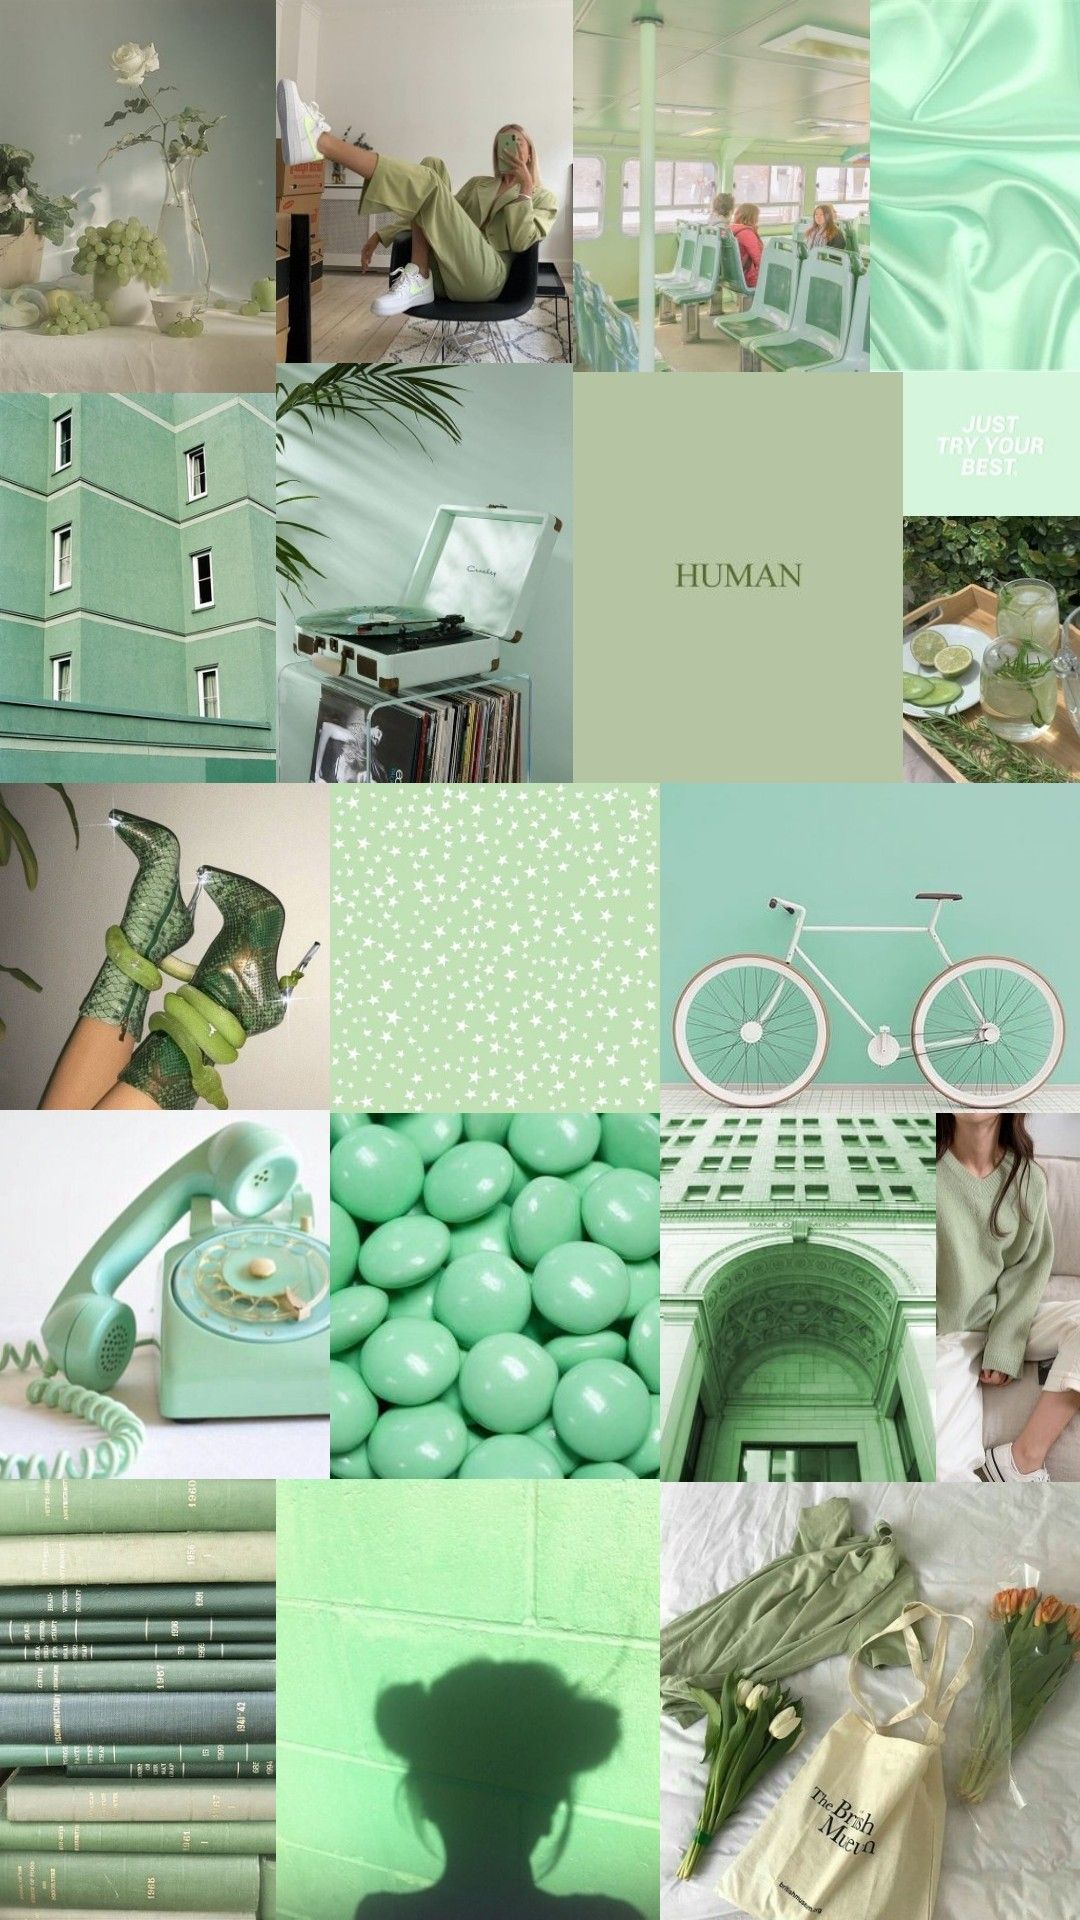 A collage of images in shades of green including plants, books, a bike, and a phone. - Pastel green